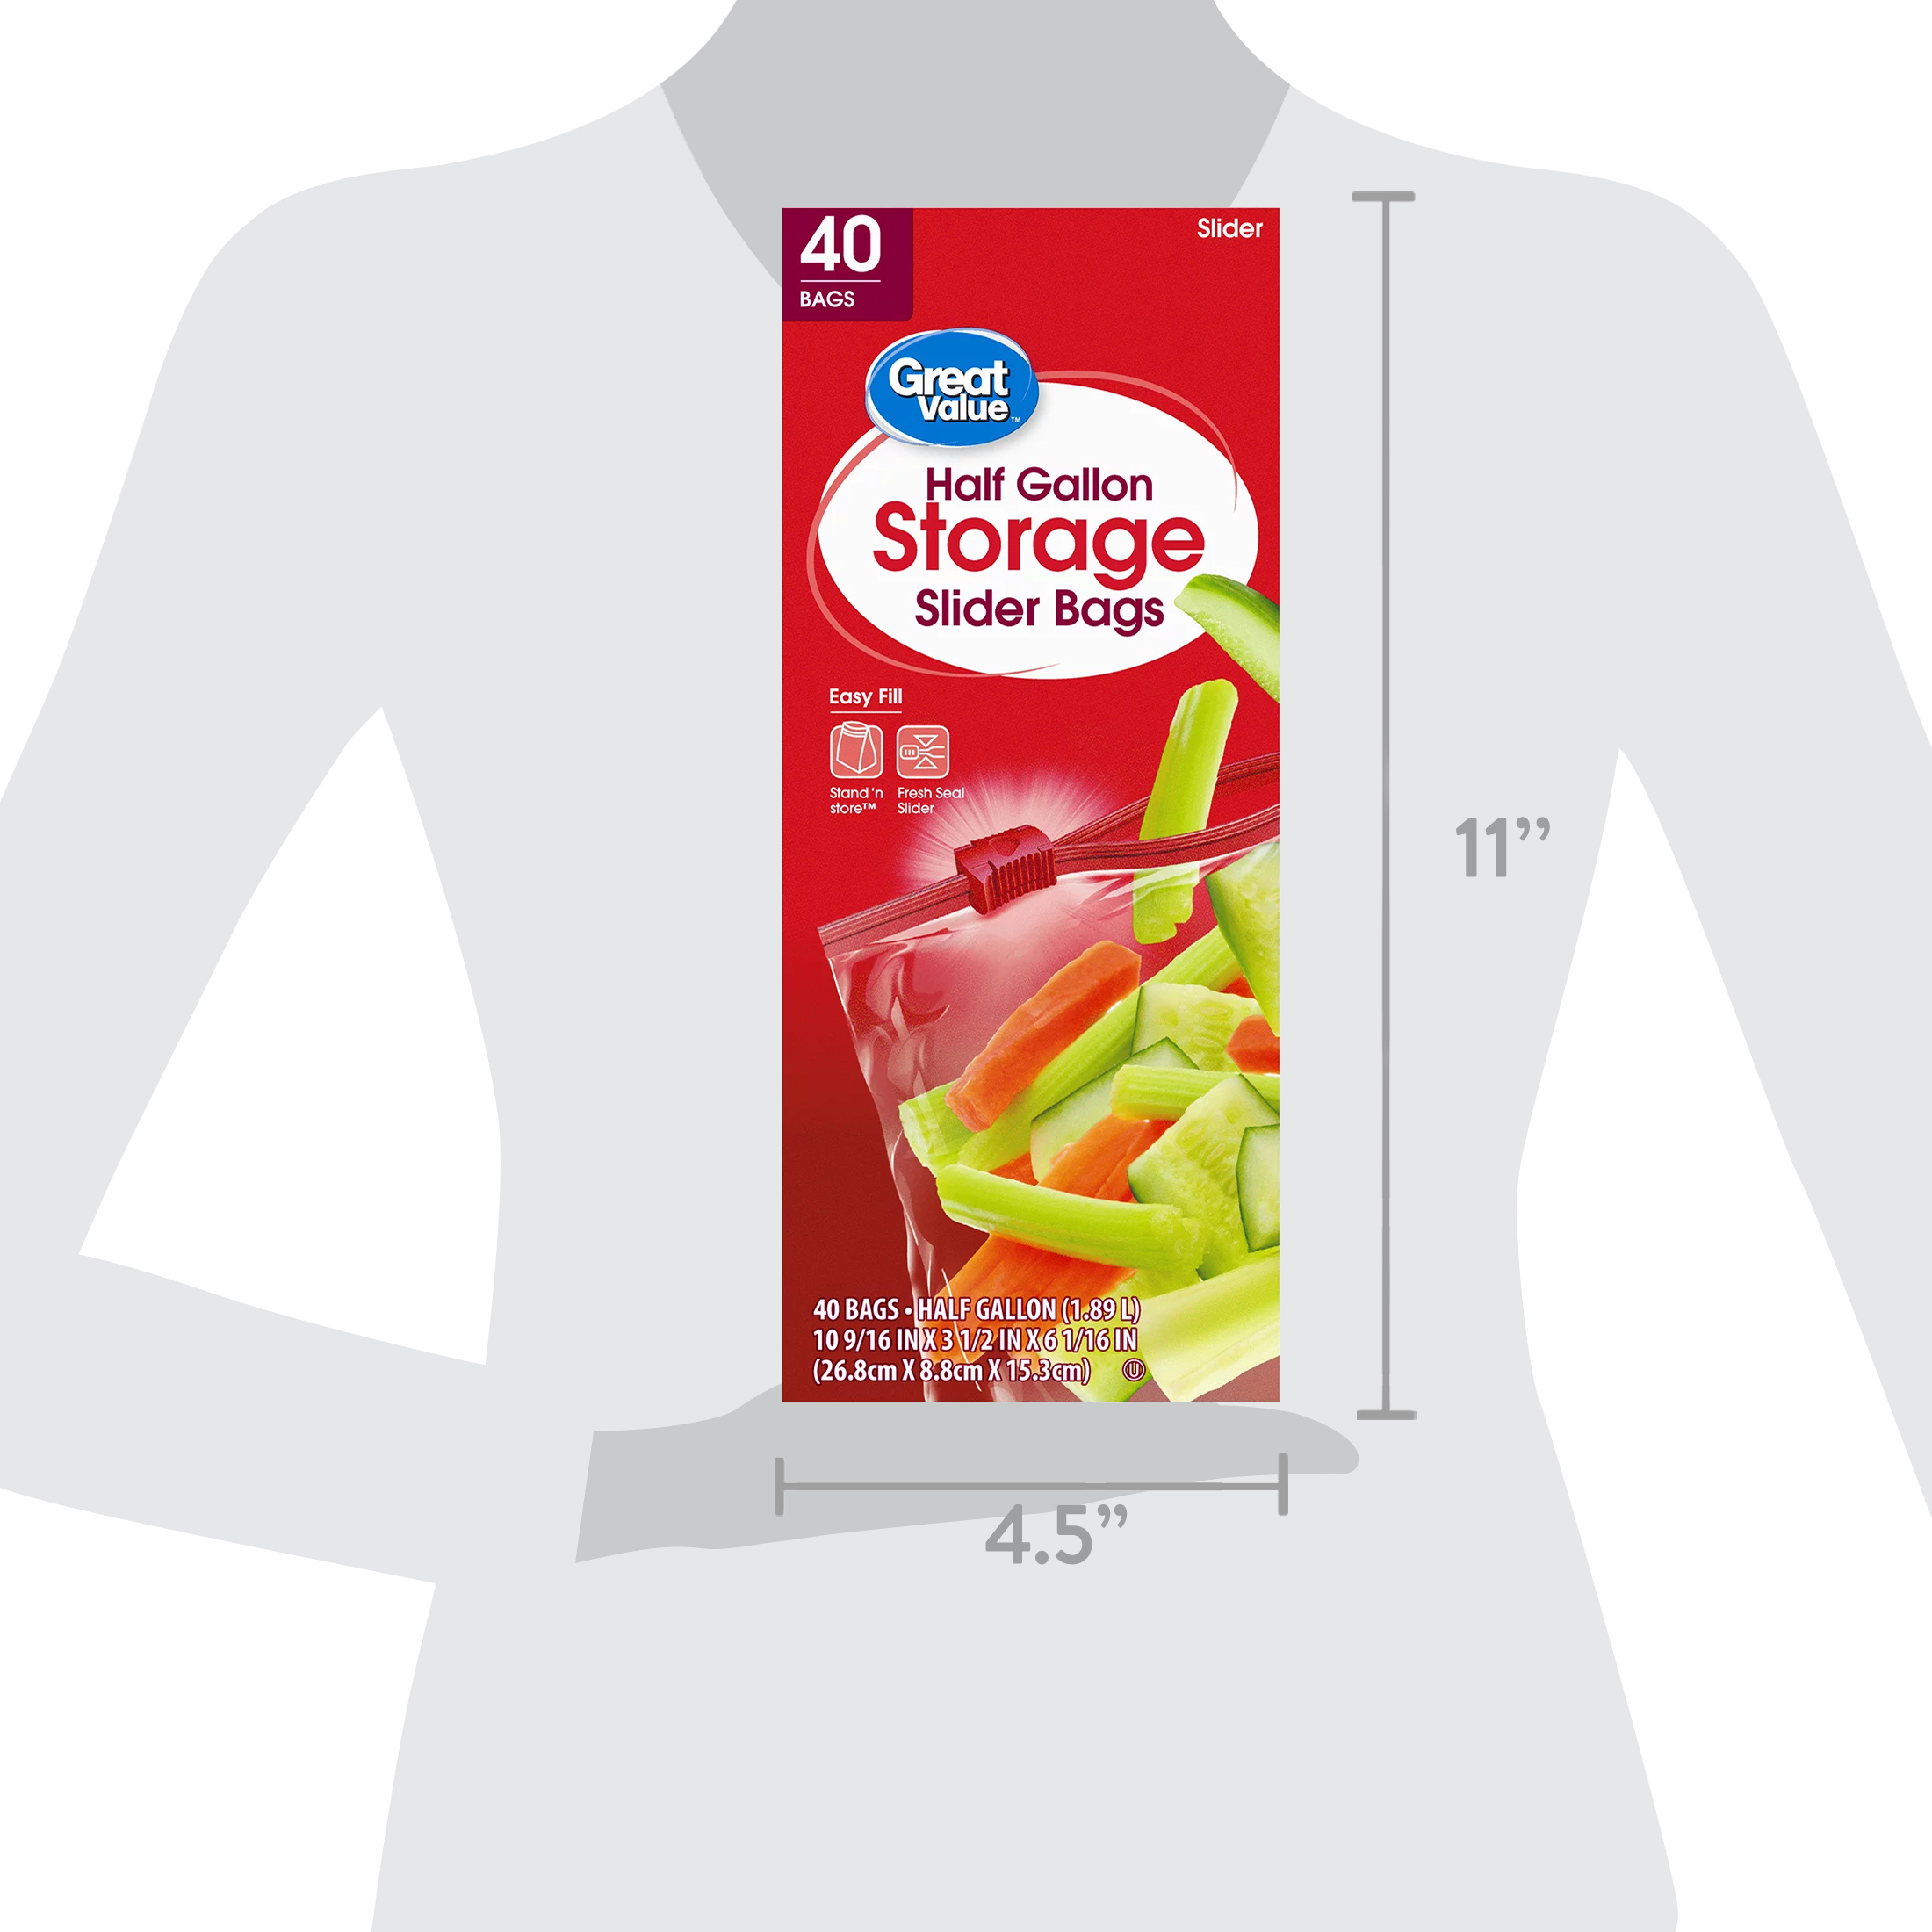 Great Value Half Gallon Slider Bags, 40 Count - image 5 of 6